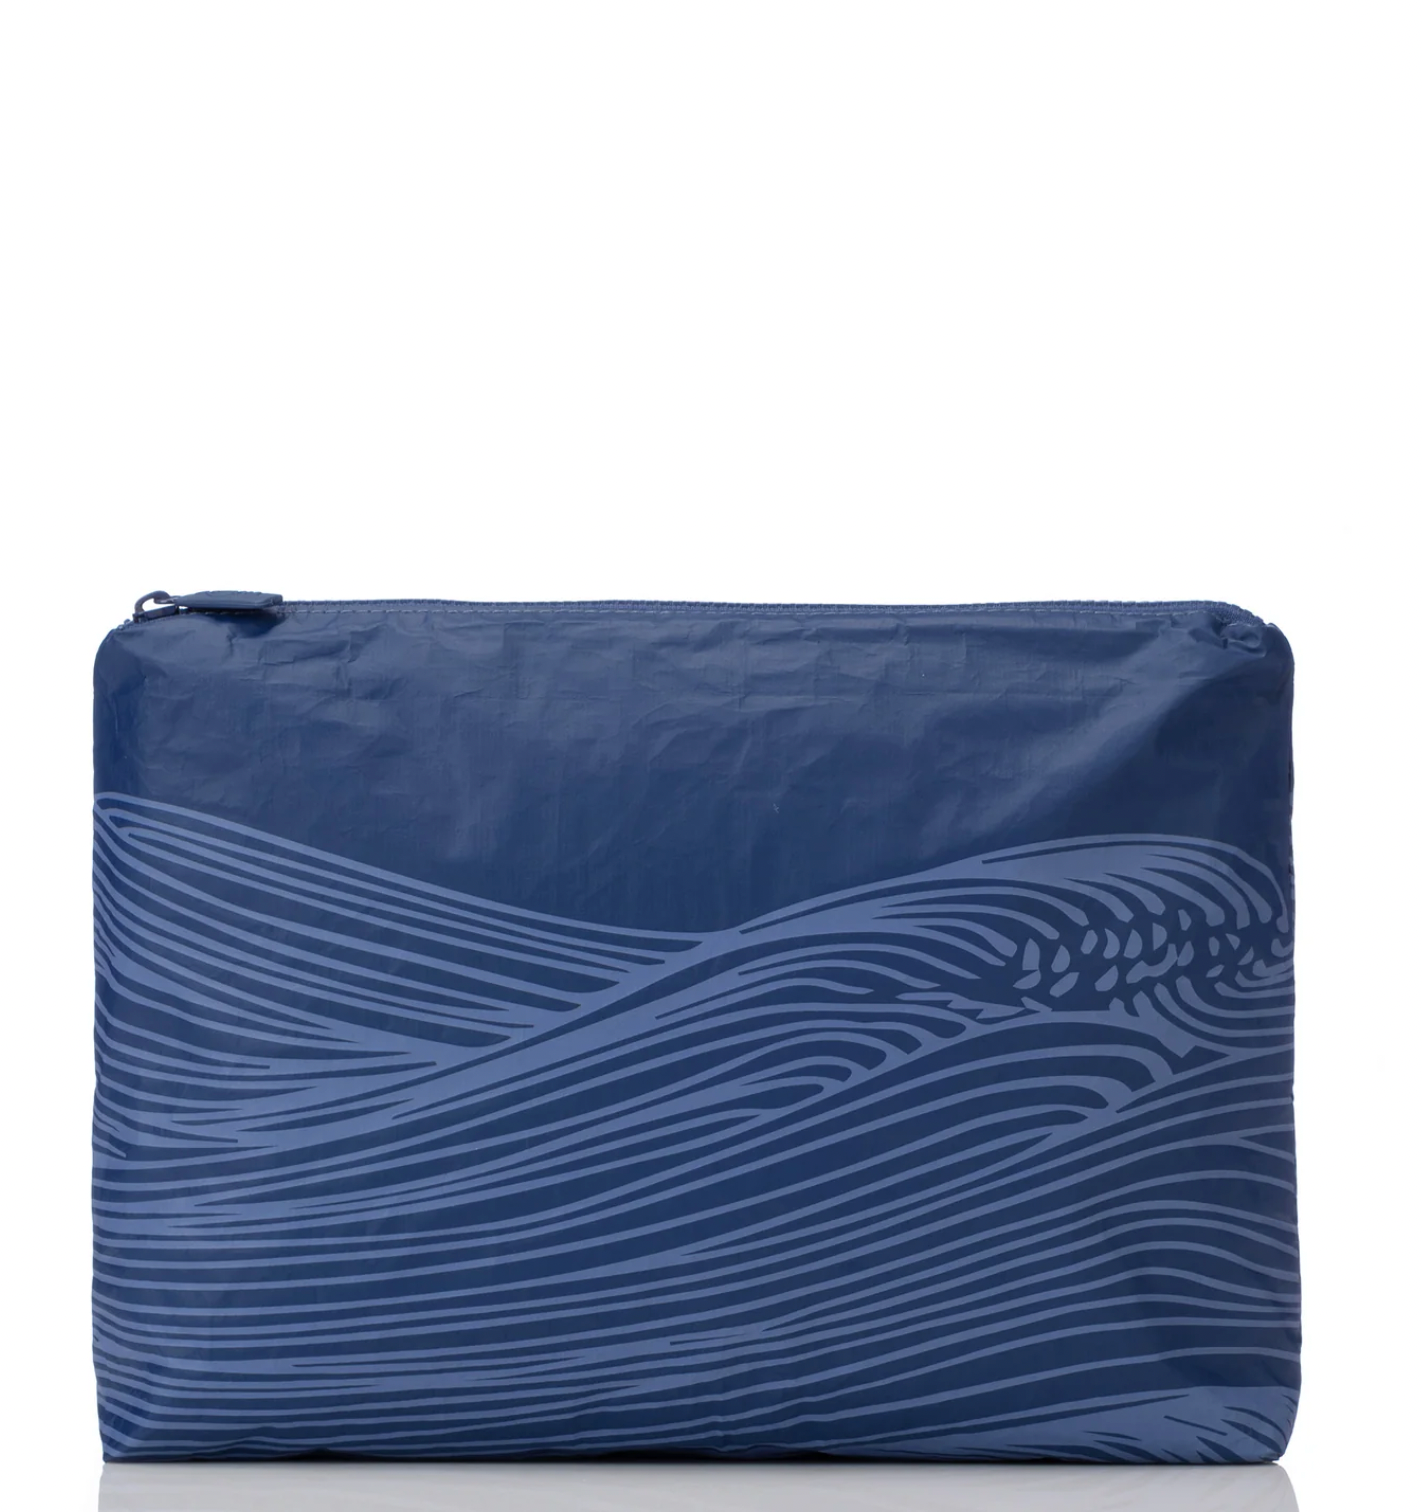 Sea Mid Pouch / Currenton Navy